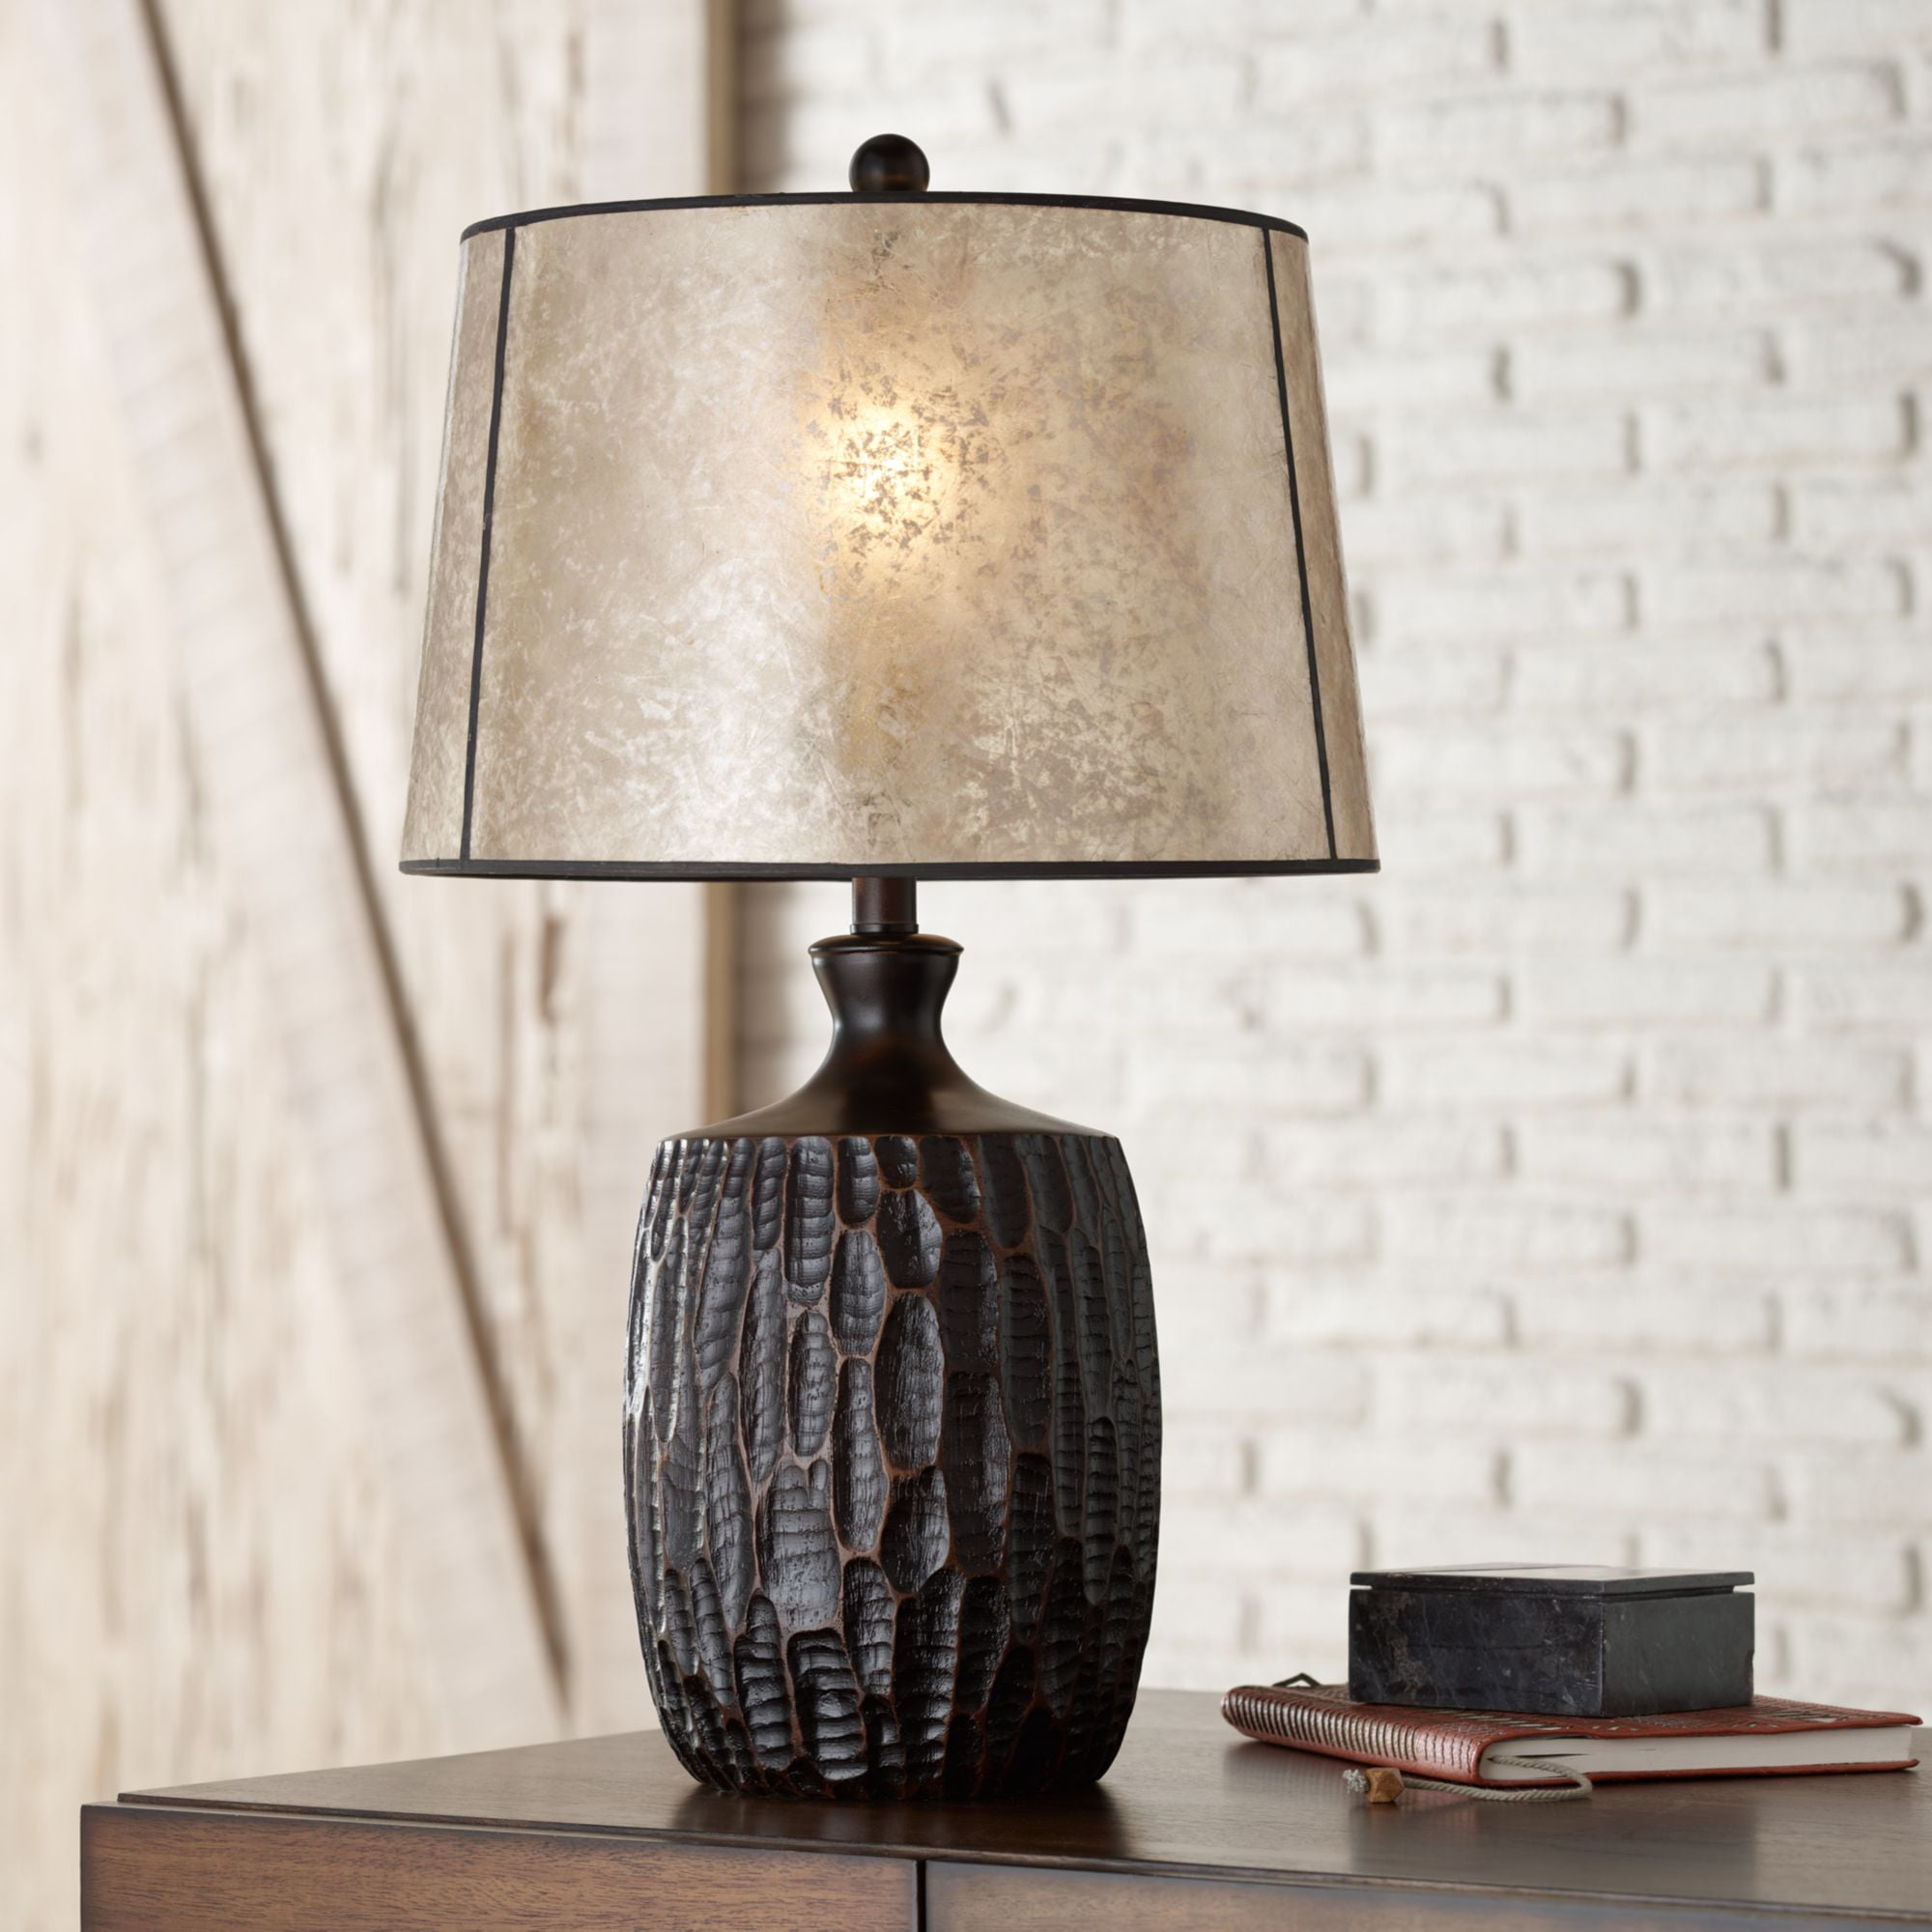 Franklin Iron Works Rustic Table Lamp, Gray Distressed Wood Table Lamp